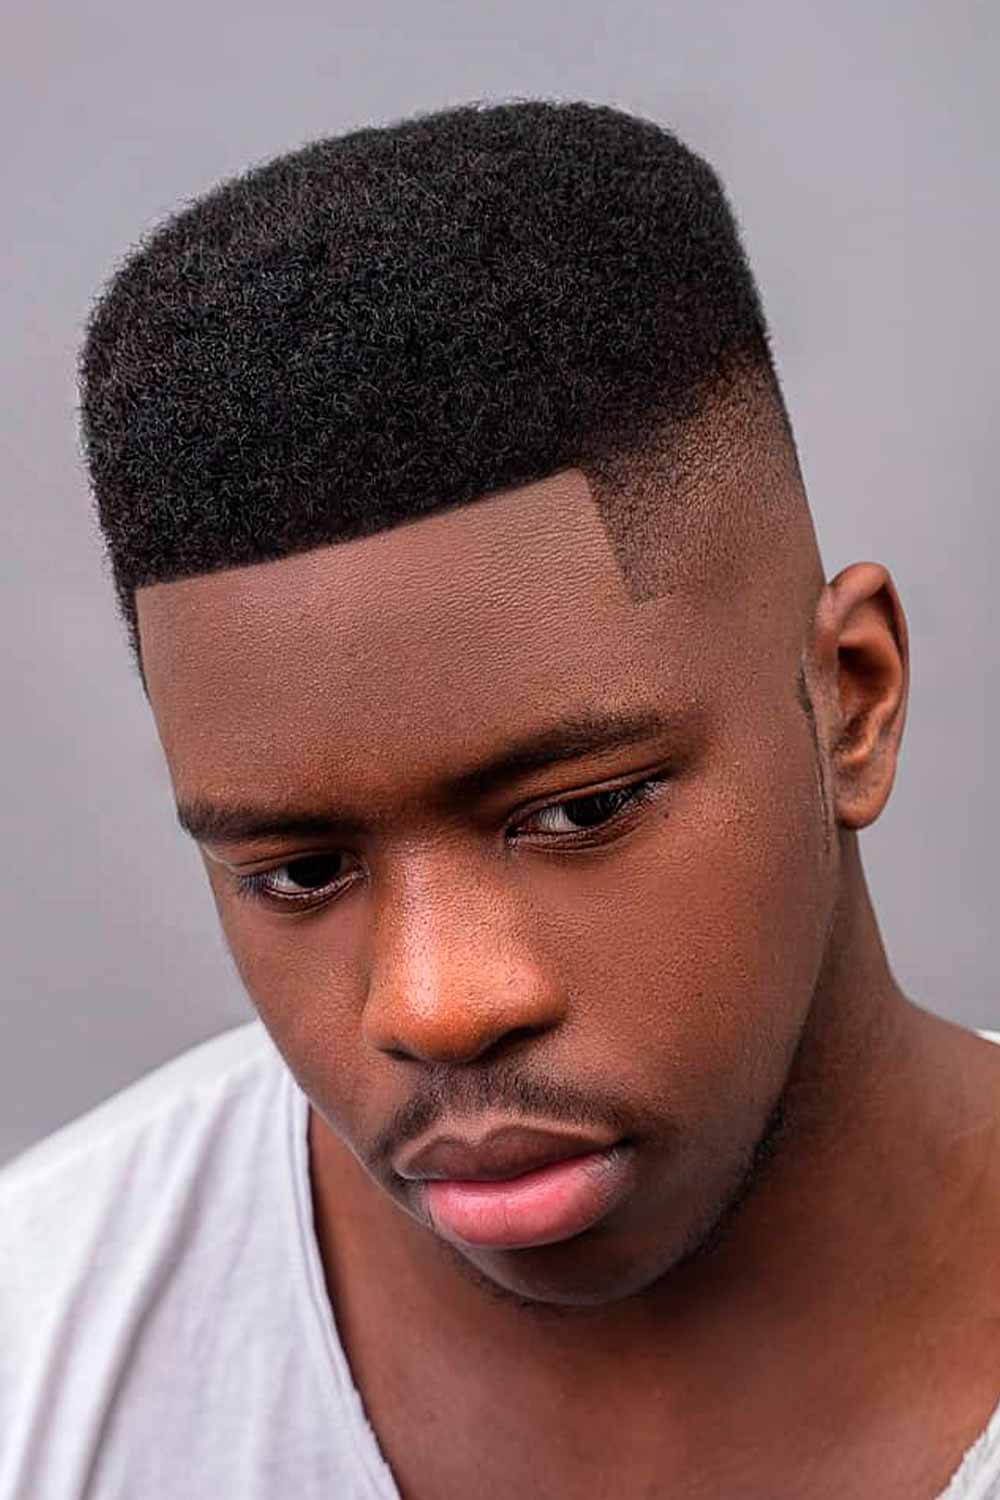 Best Hairstyles For Men 2023 (Updated) – LIFESTYLE BY PS